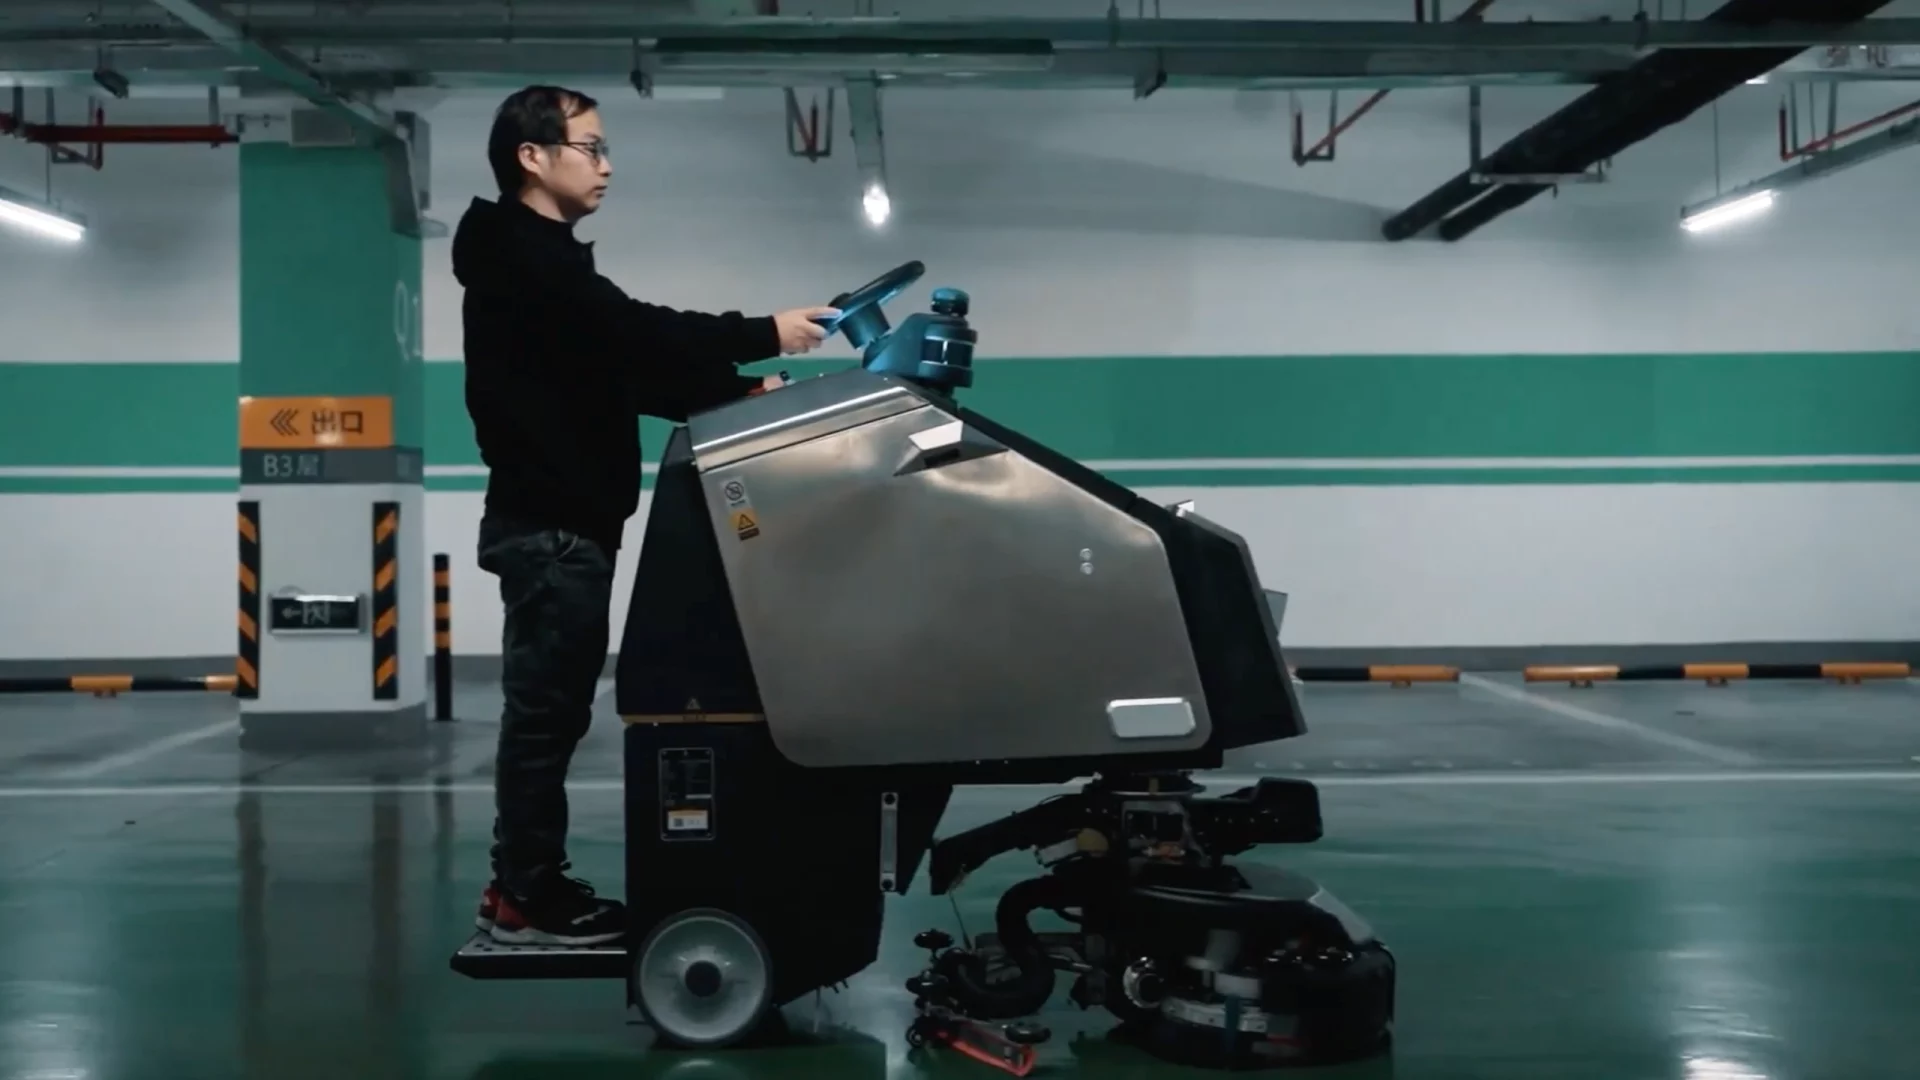 Image of man standing on a step attached to the back of cleaning robot, Scrubber 75